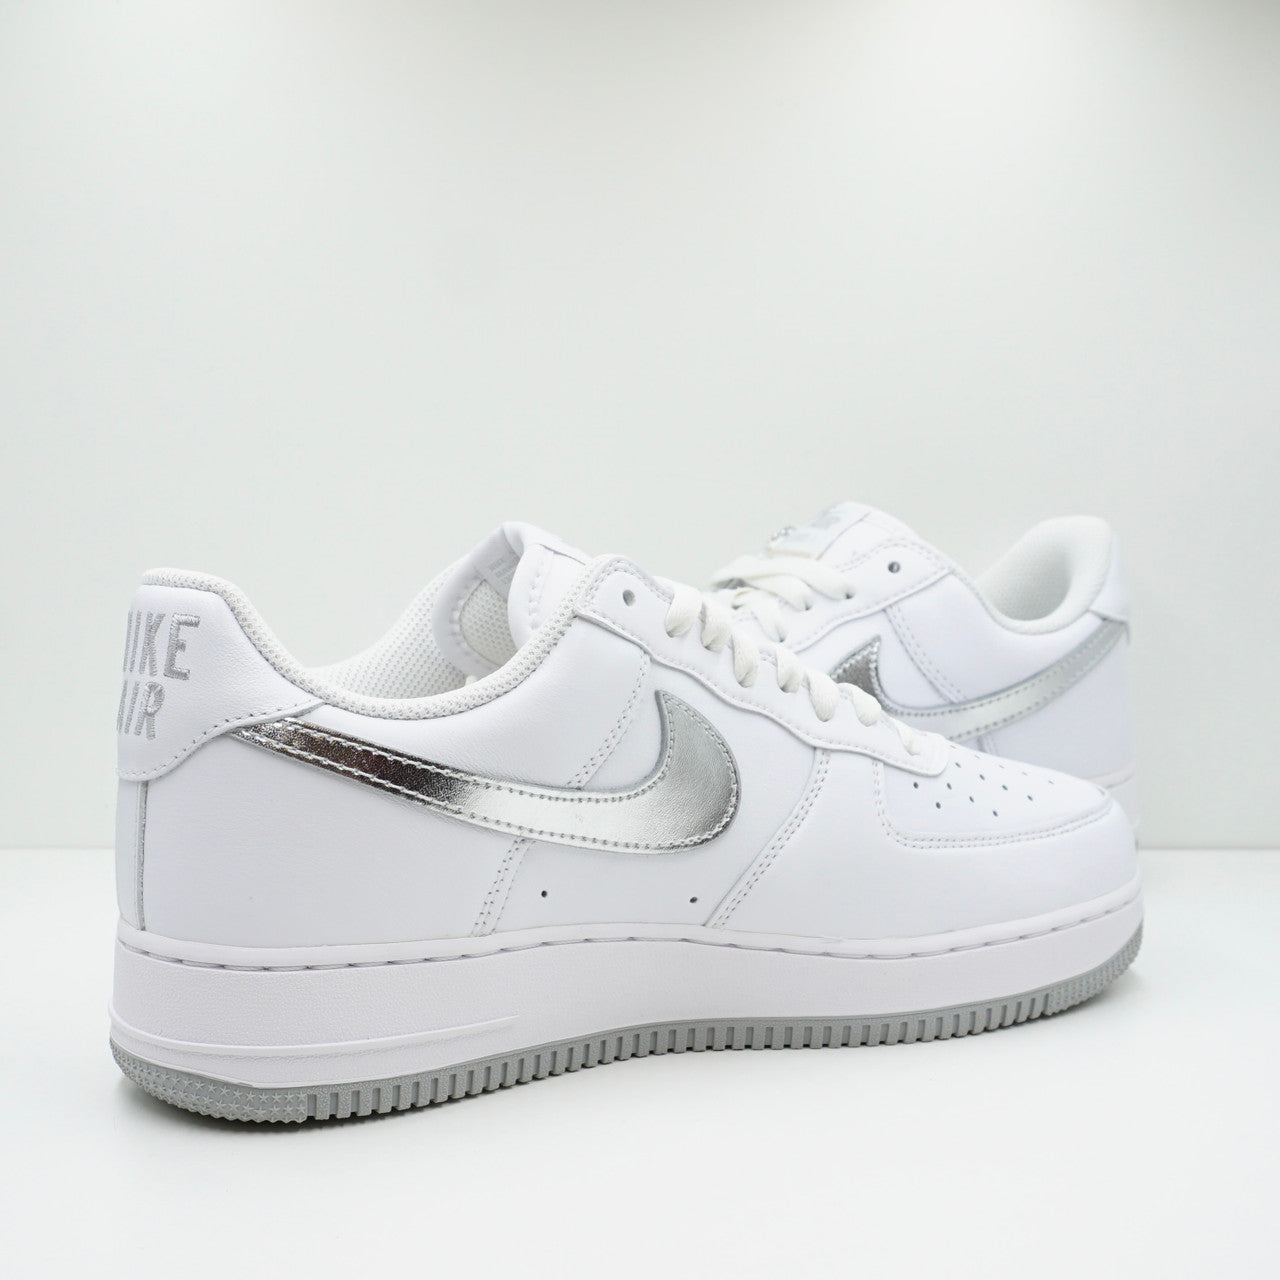 Nike Air Force 1 '07 Low Color Of The Month White Metallic Silver